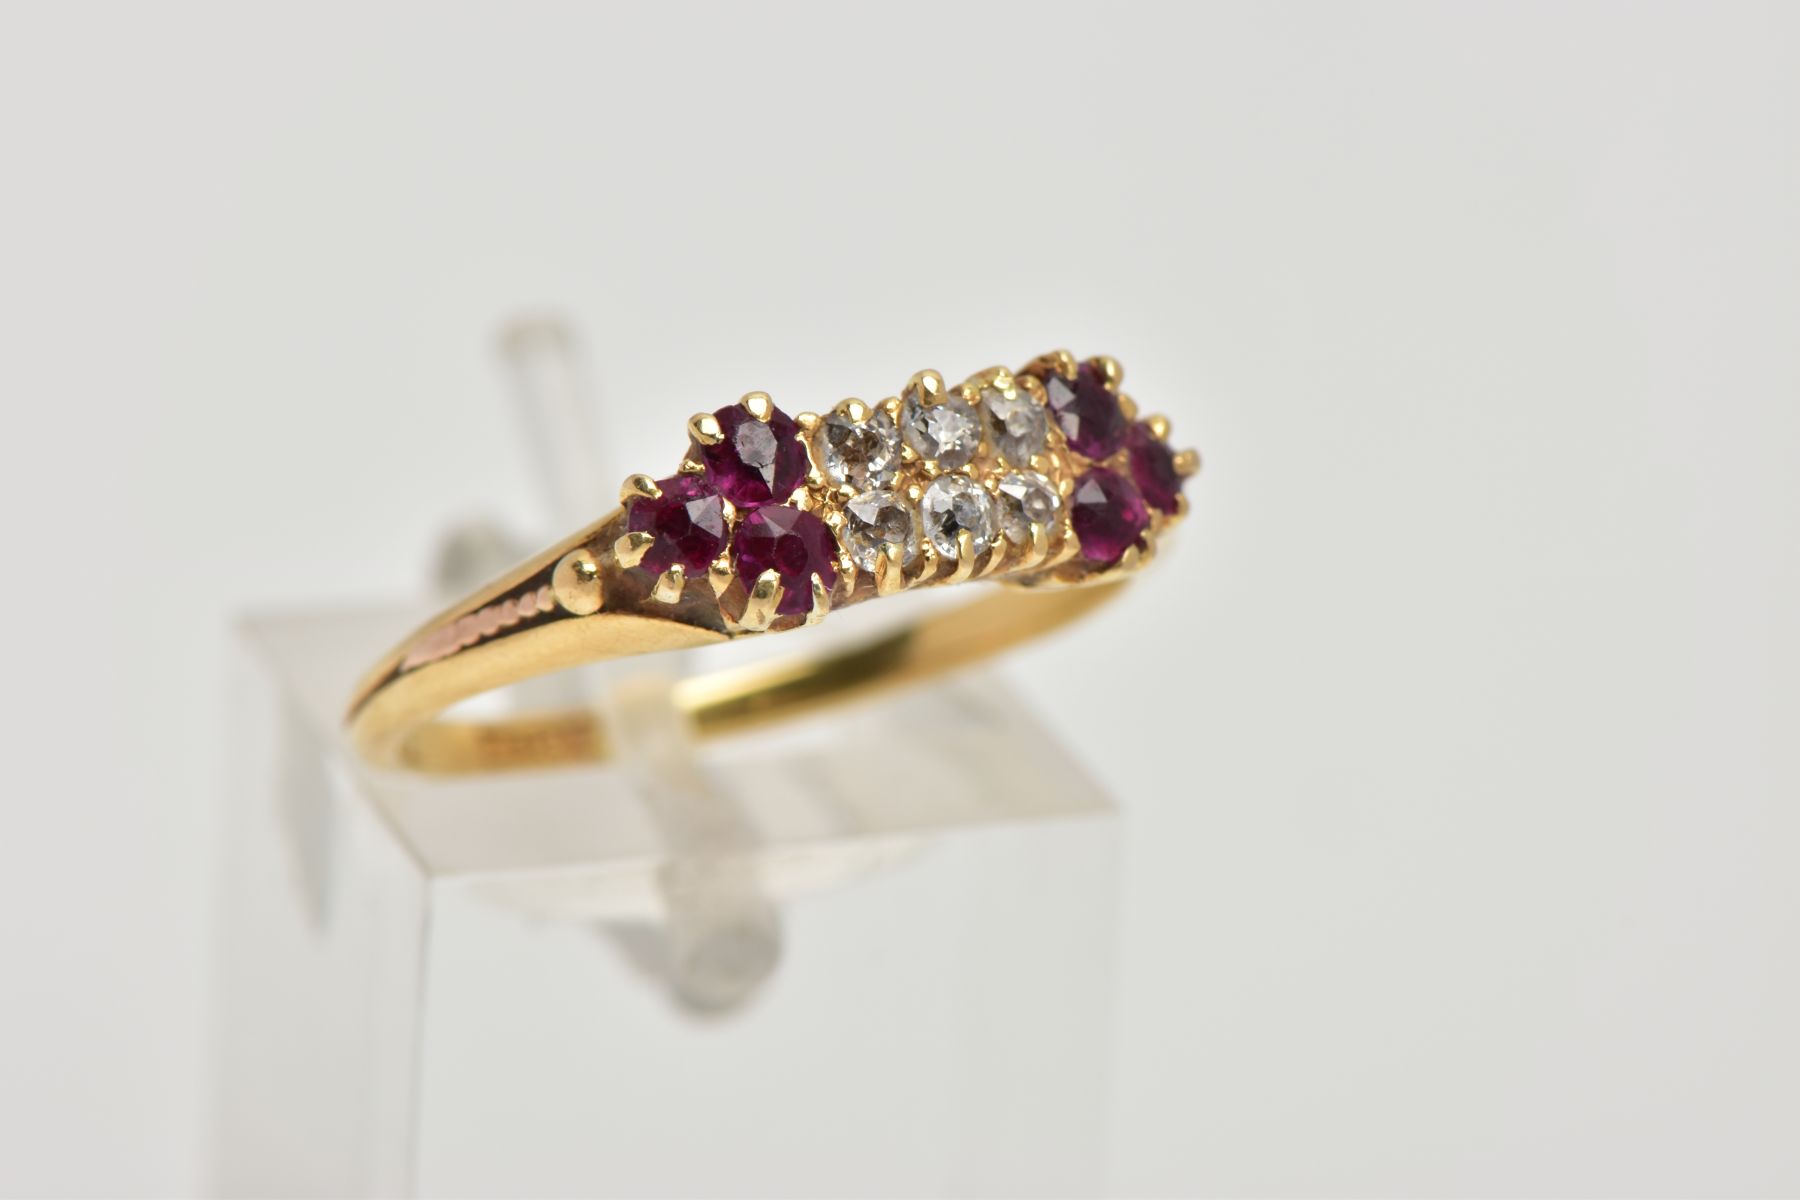 A DIAMOND AND RUBY RING, six old cut diamonds prong set in yellow metal, accented with three - Image 4 of 4